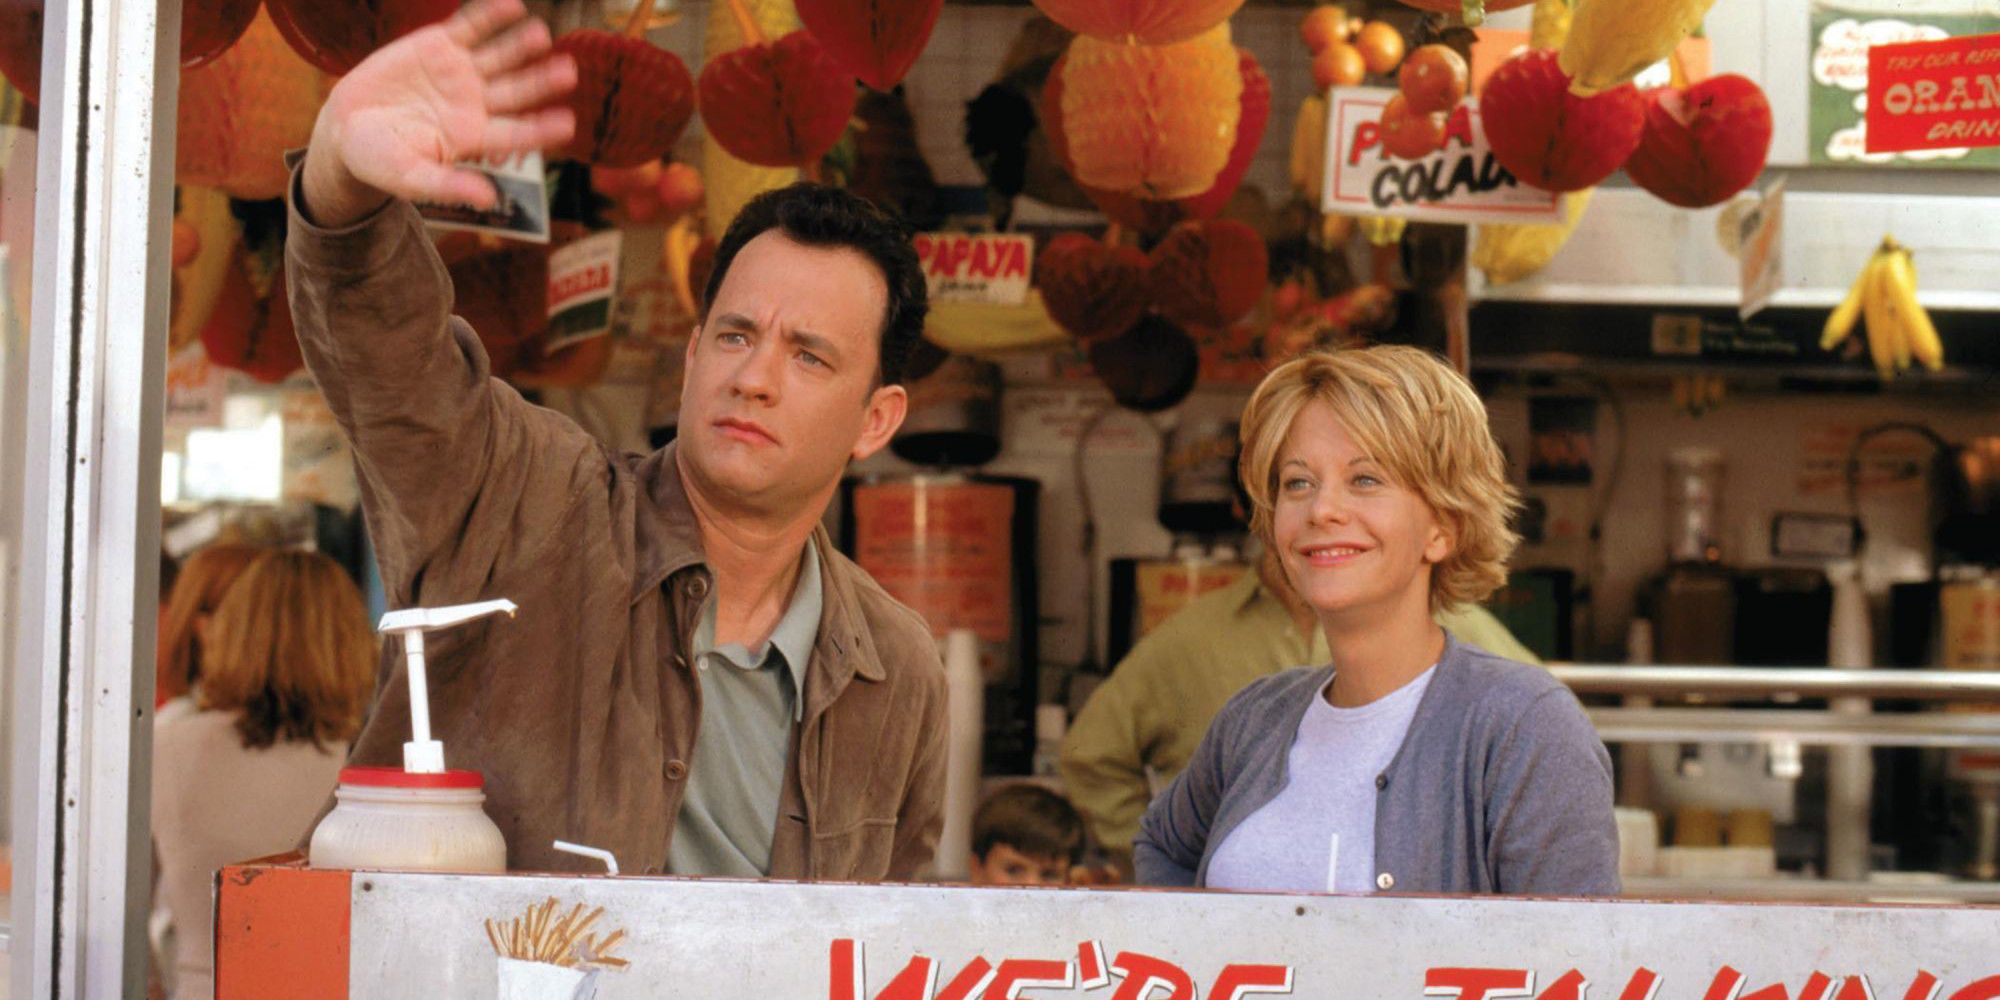 Kathleen and Joe look out the window of a restaurant in You've Got Mail.